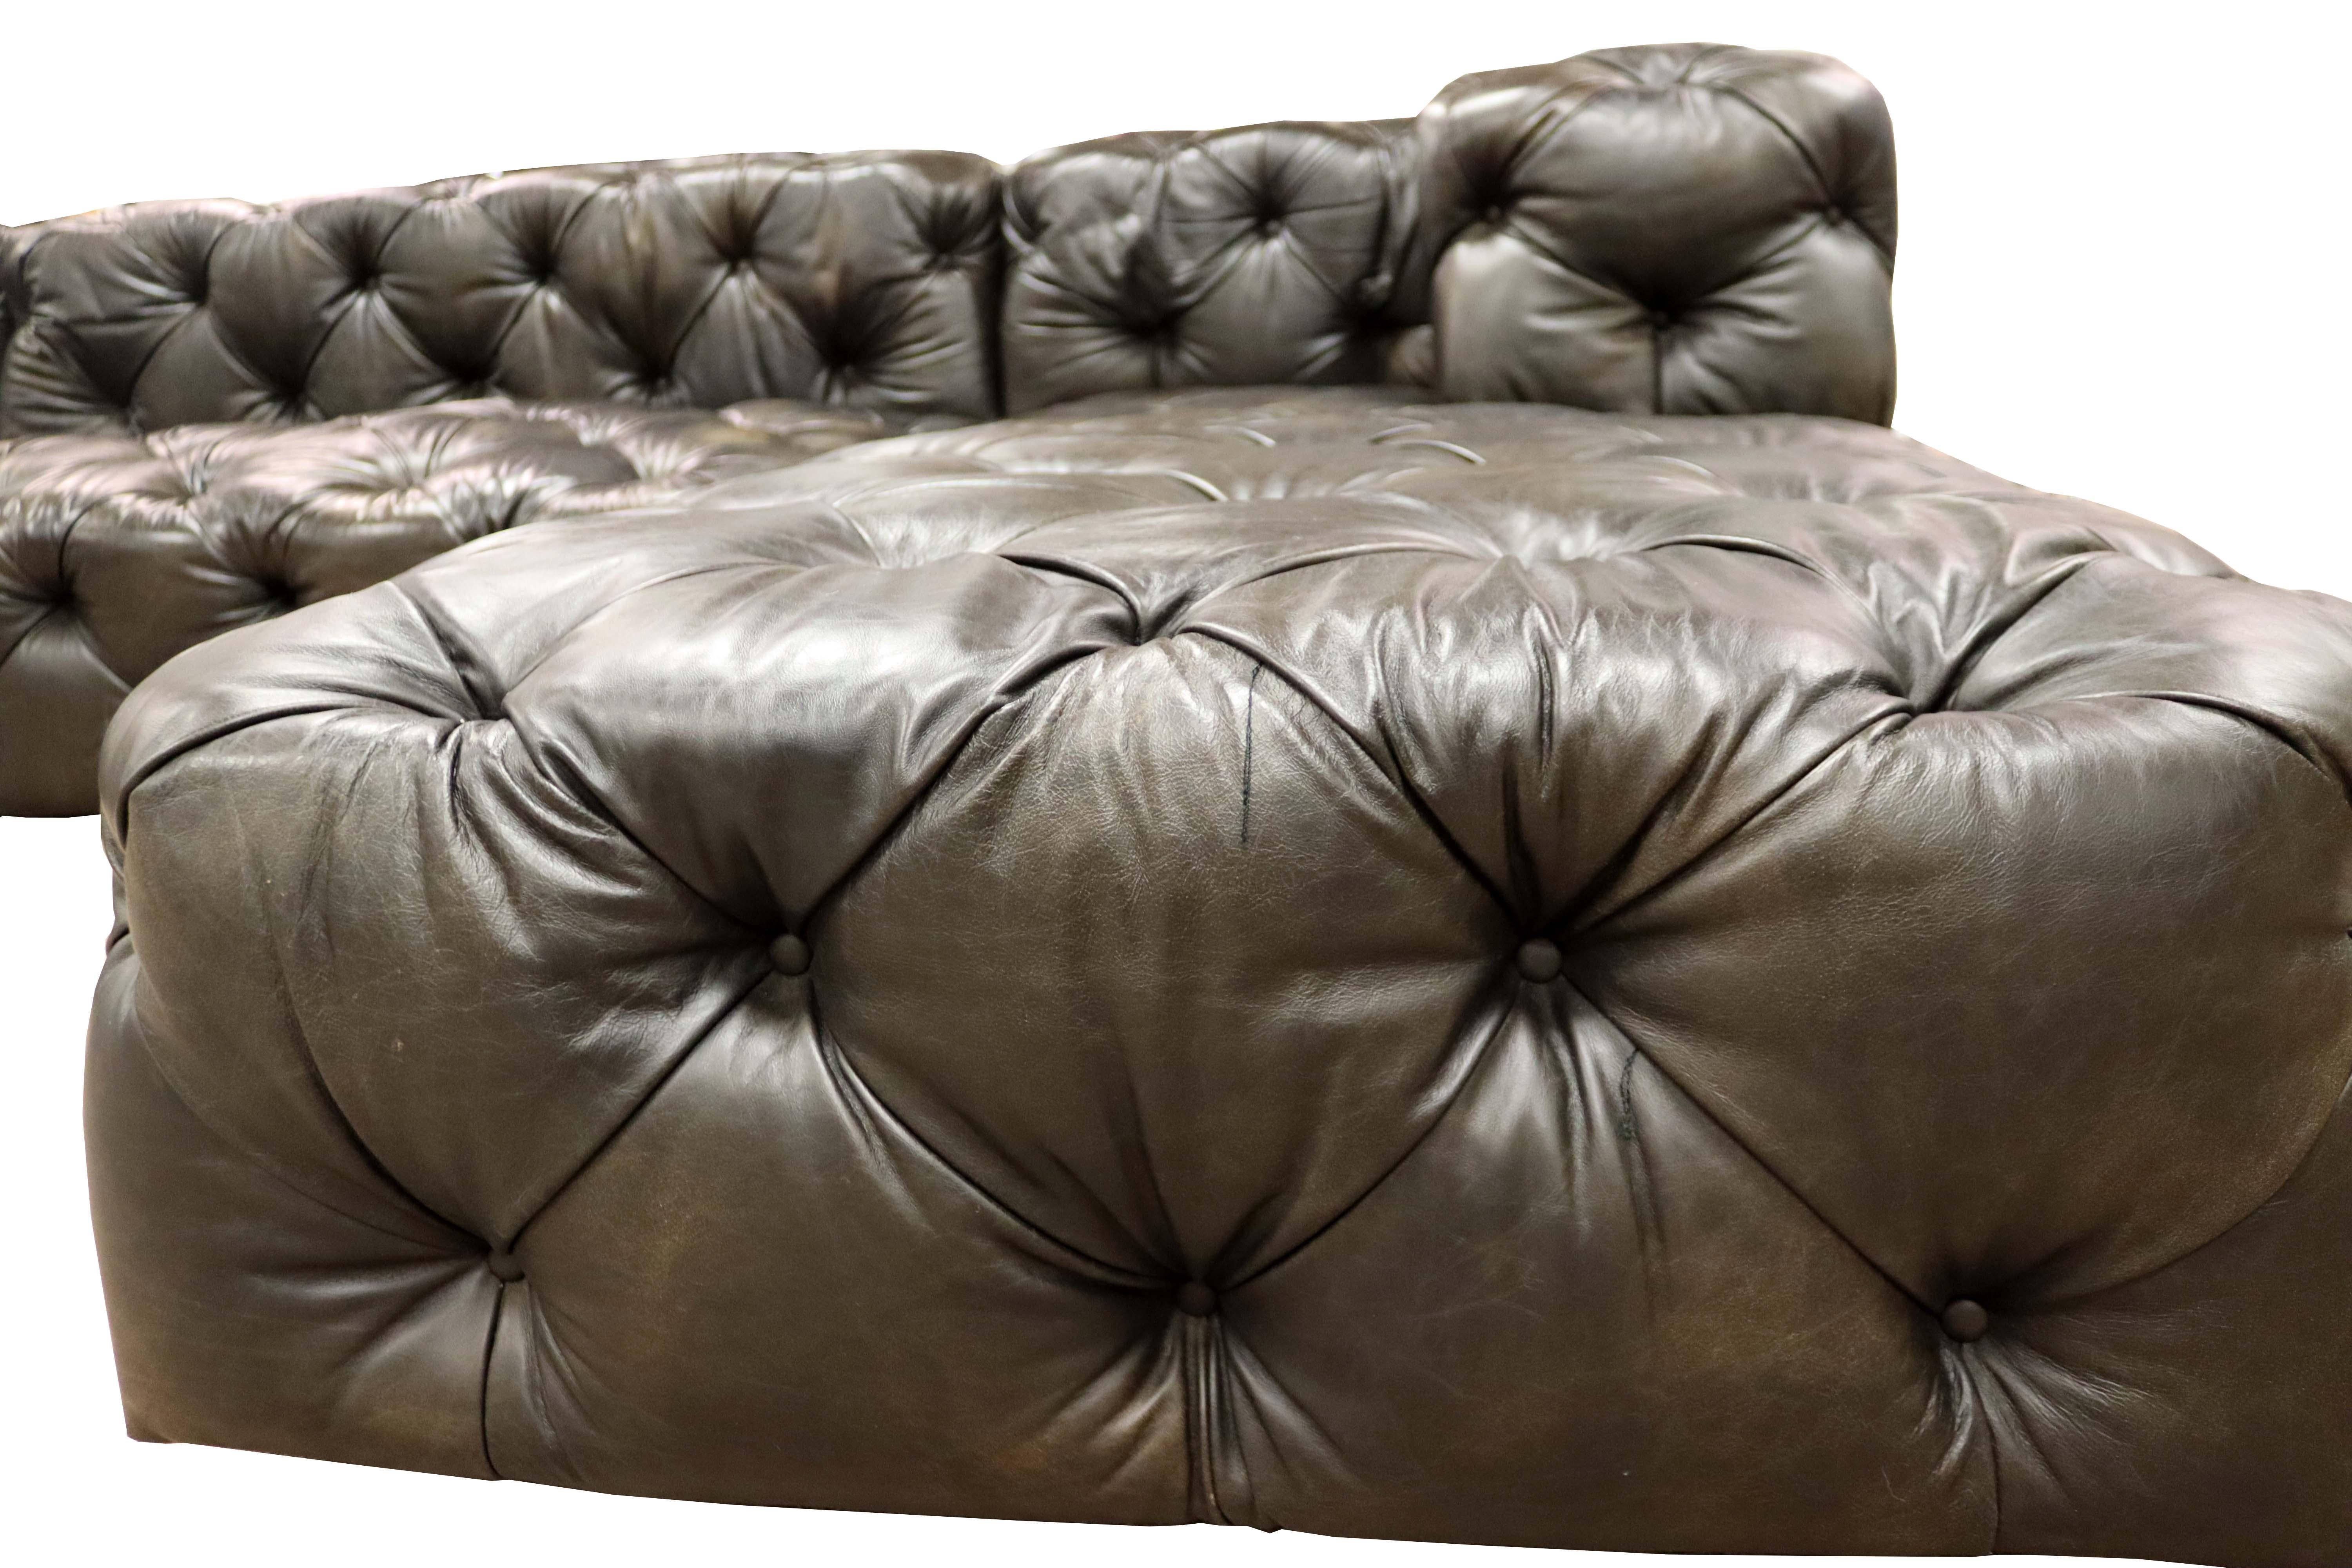 Grandly proportioned with a low profile, this sectional with chaise is lavishly detailed with all over button tufted in a soft brown-black leather. Squared off arms give this fantastic seating a contemporary yet traditional vibe, suited to most